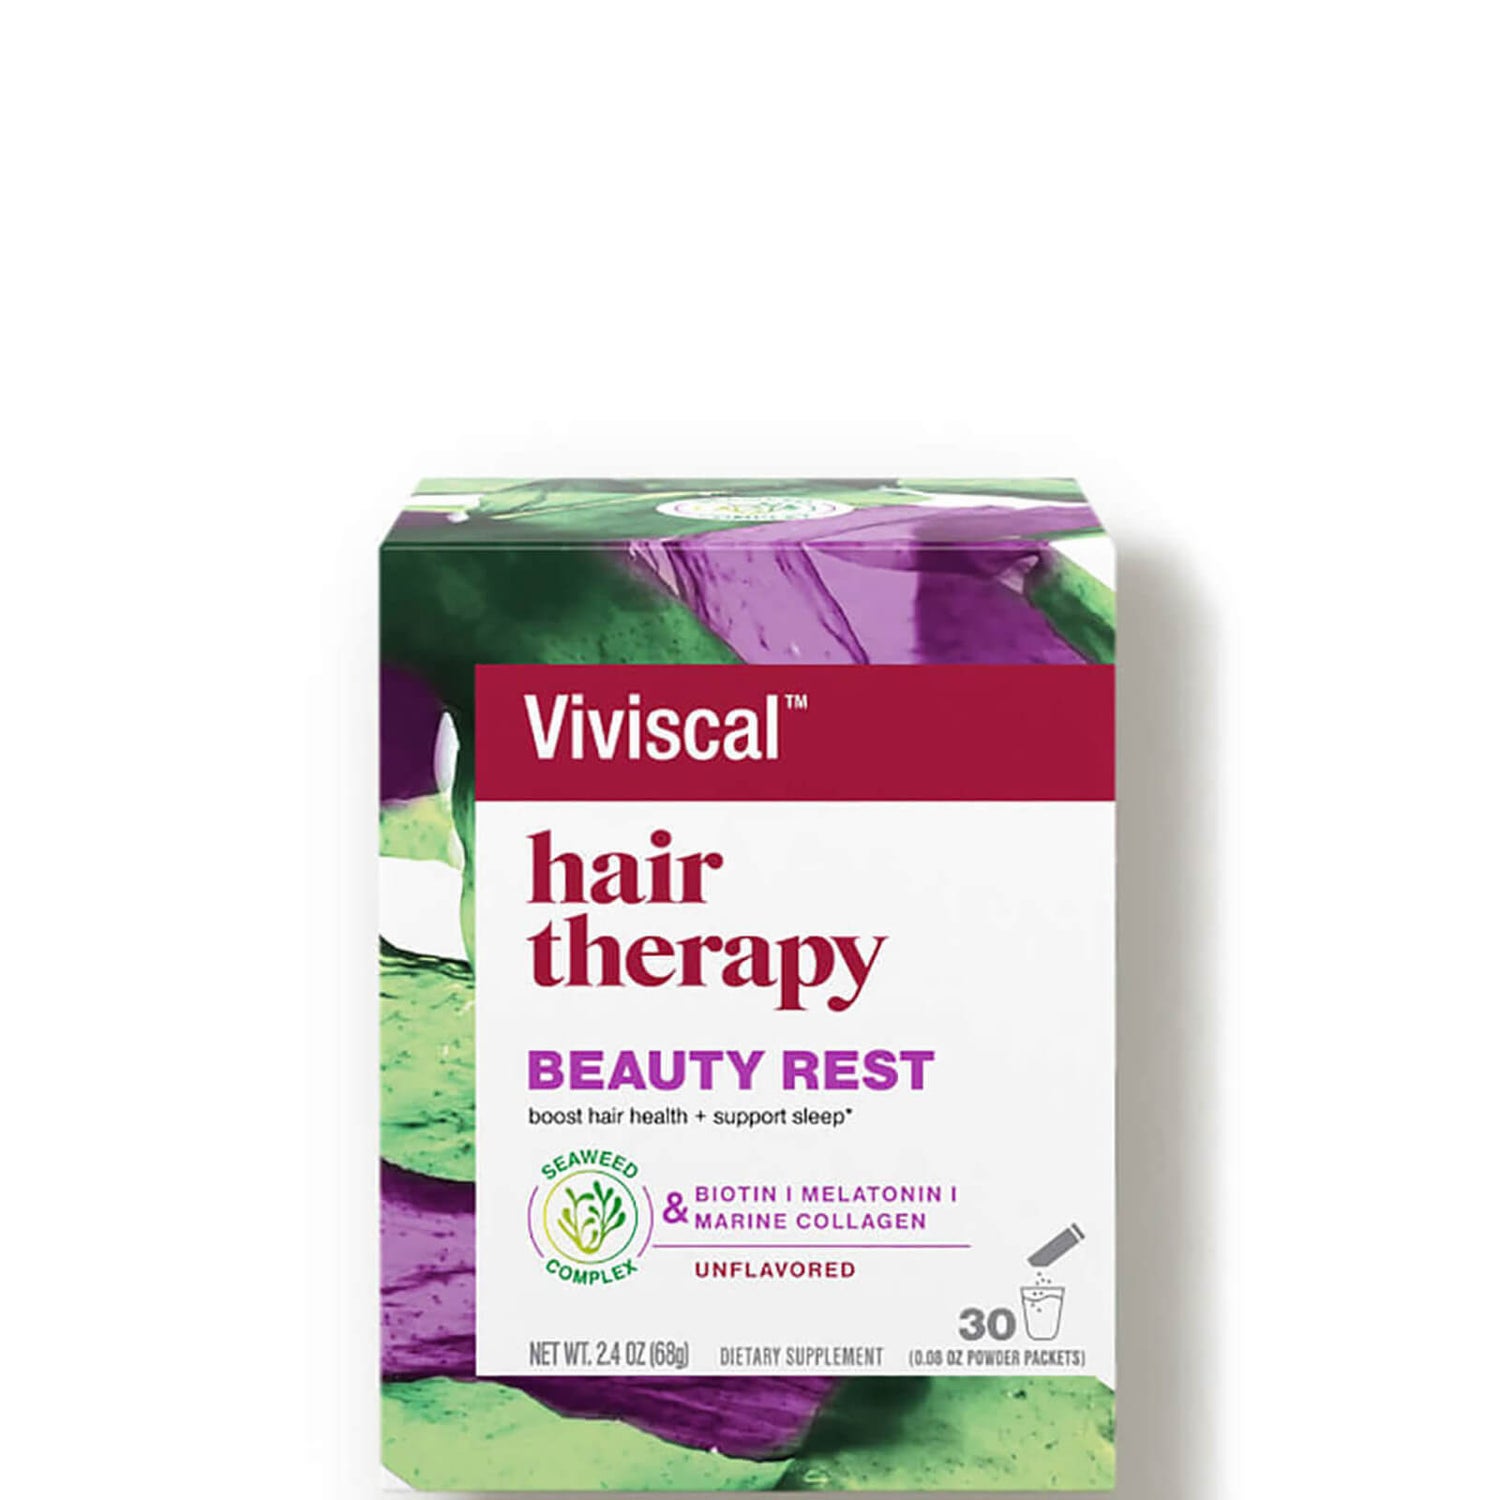 Viviscal Hair Therapy Beauty Rest (30 count)